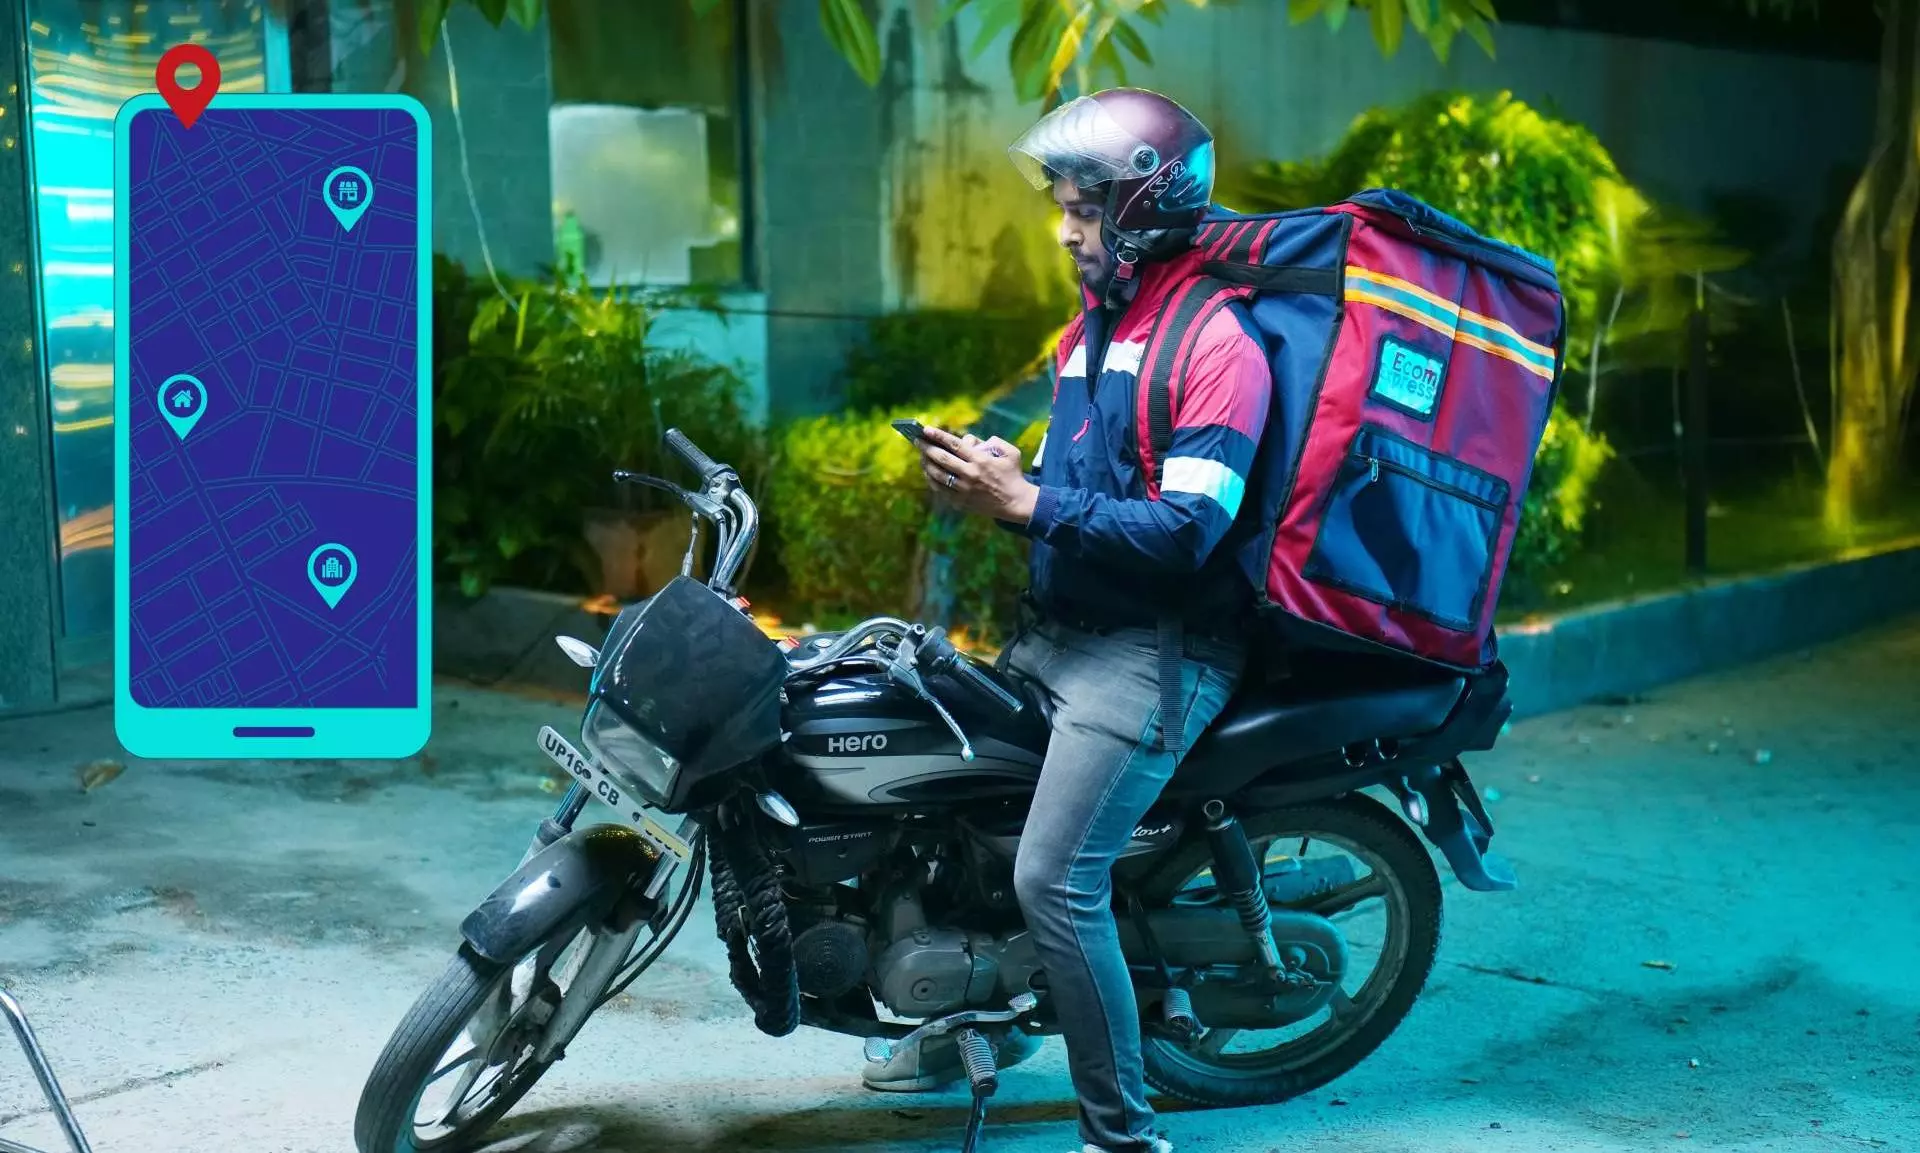 Ecom Express launches same day delivery across 30 cities